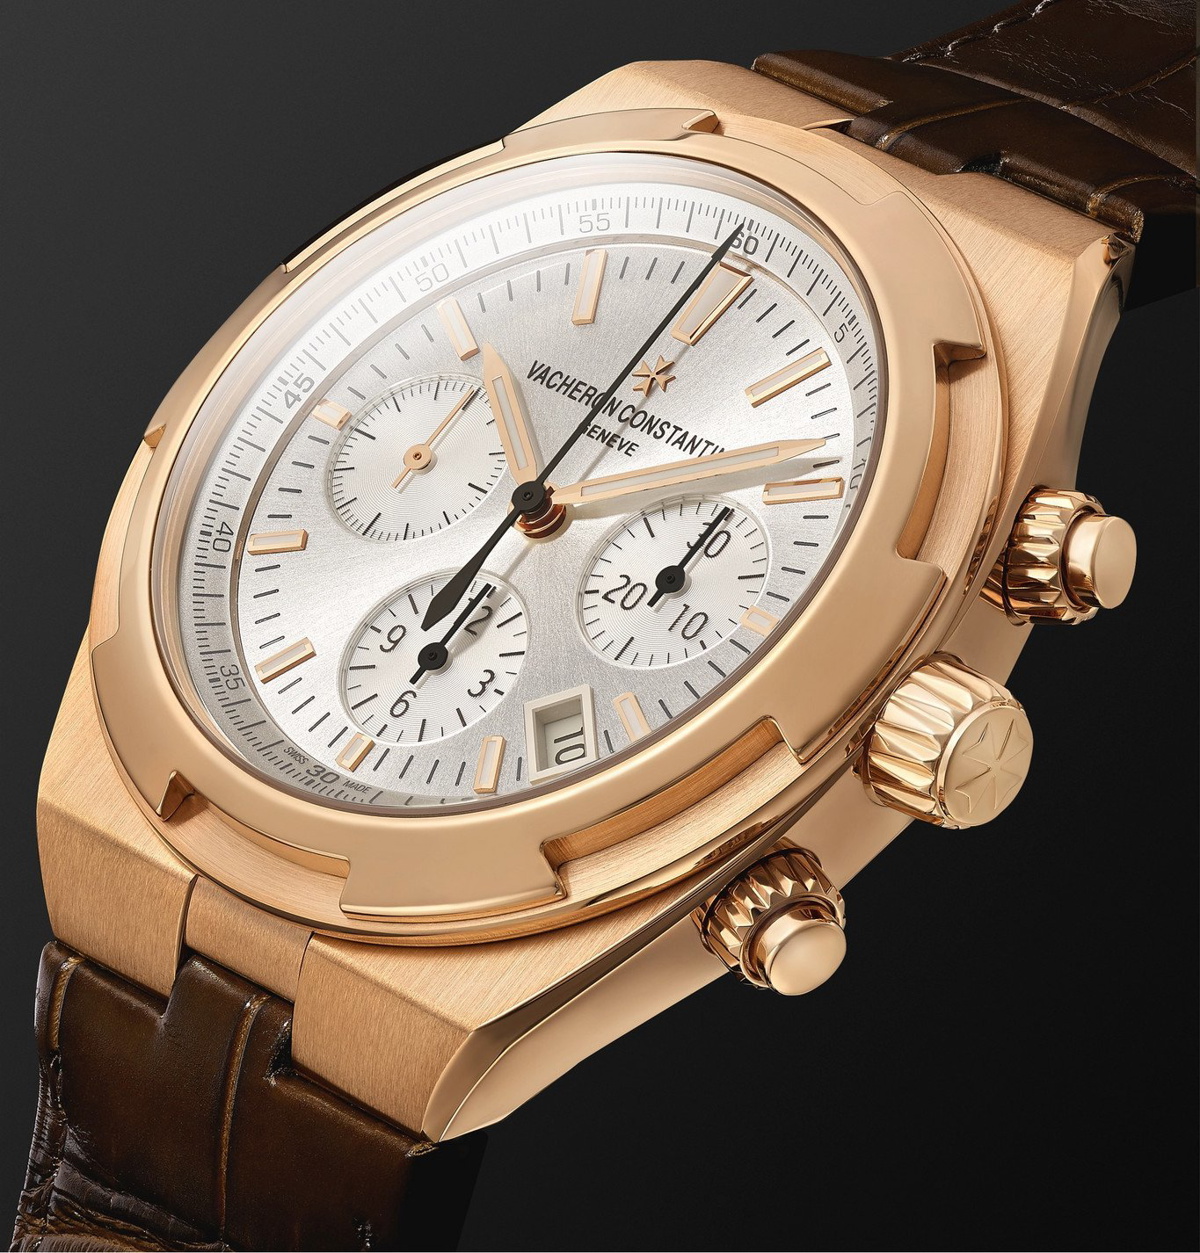 Overseas Chronograph 42.5mm Pink Gold